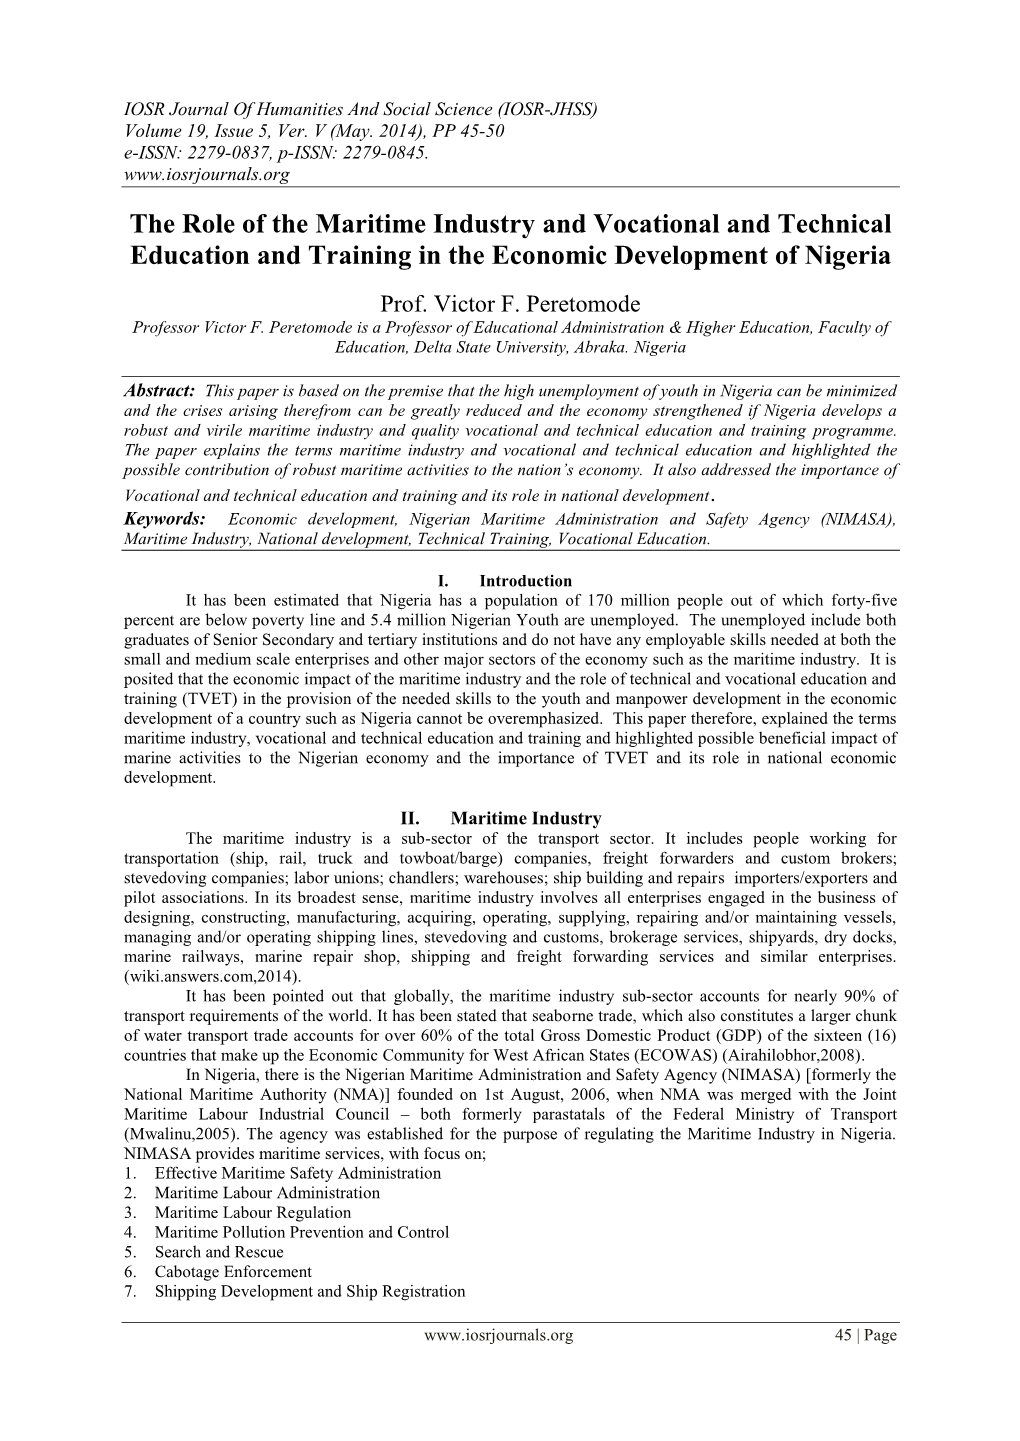 The Role of the Maritime Industry and Vocational and Technical Education and Training in the Economic Development of Nigeria